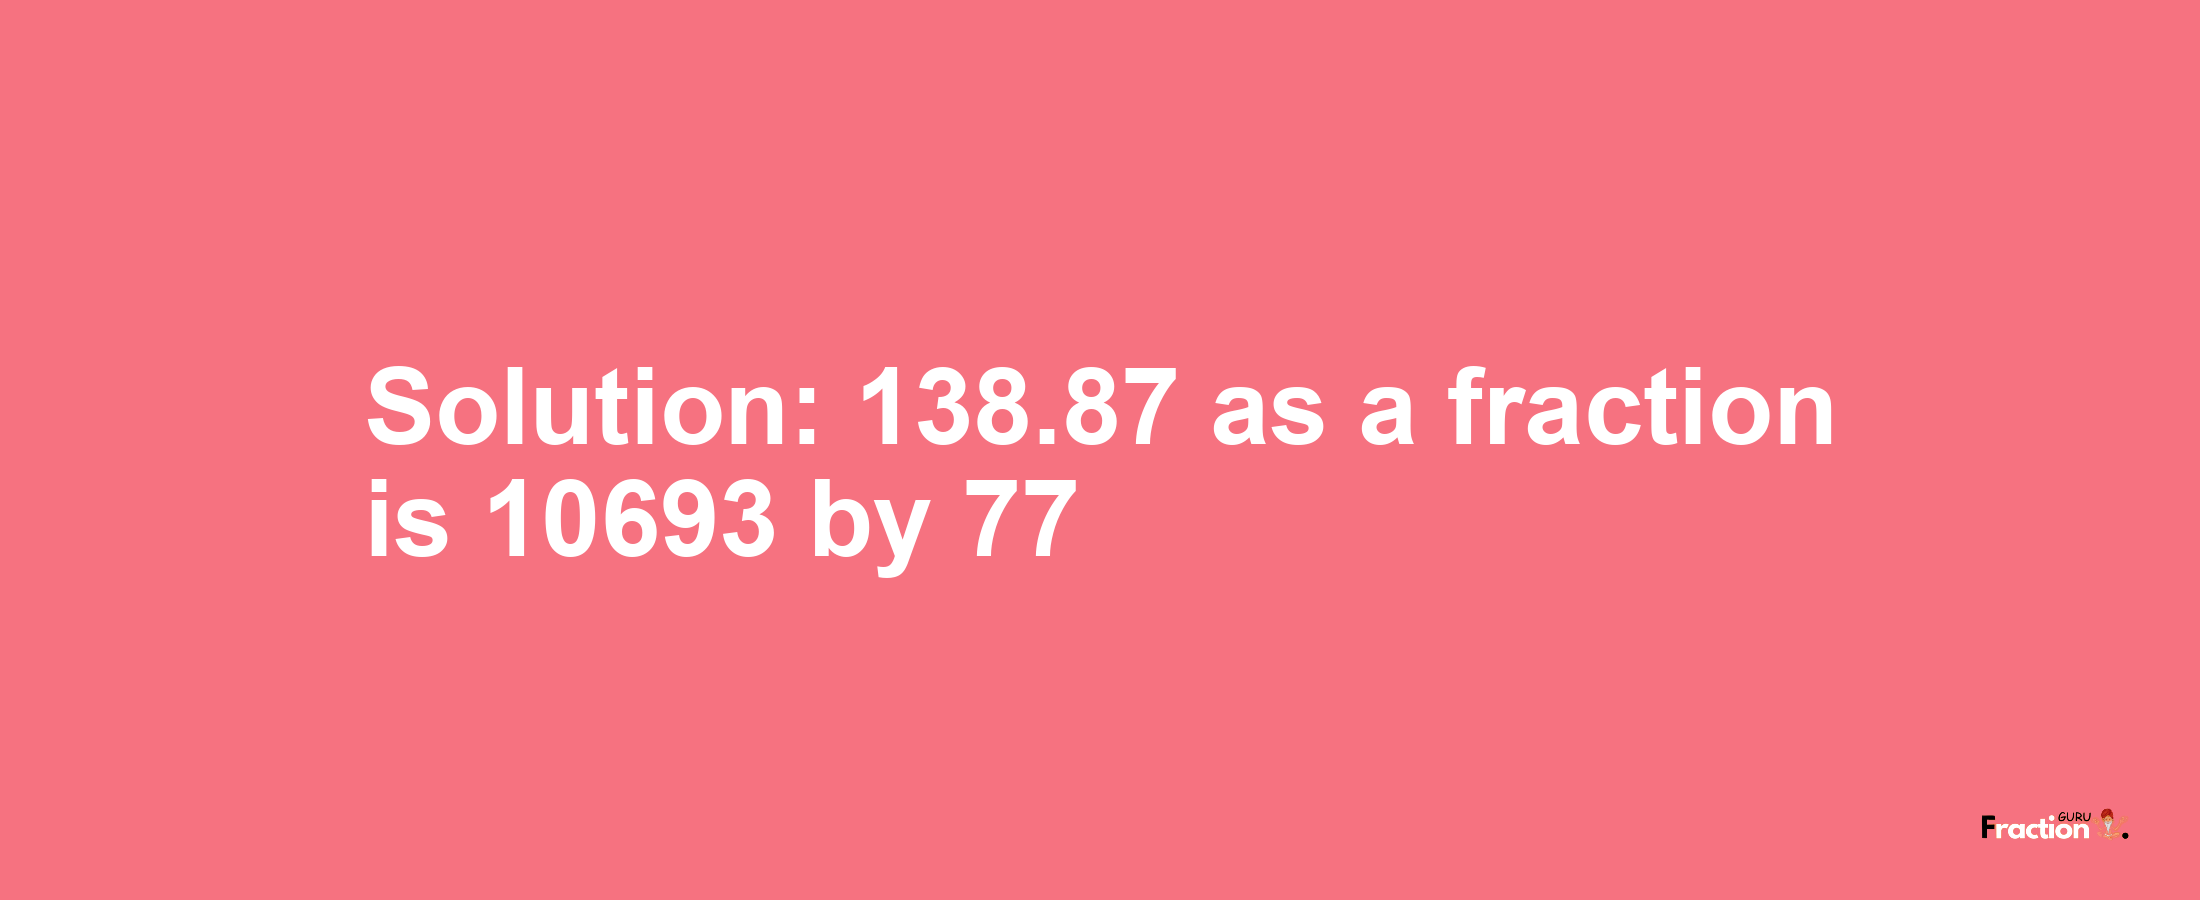 Solution:138.87 as a fraction is 10693/77